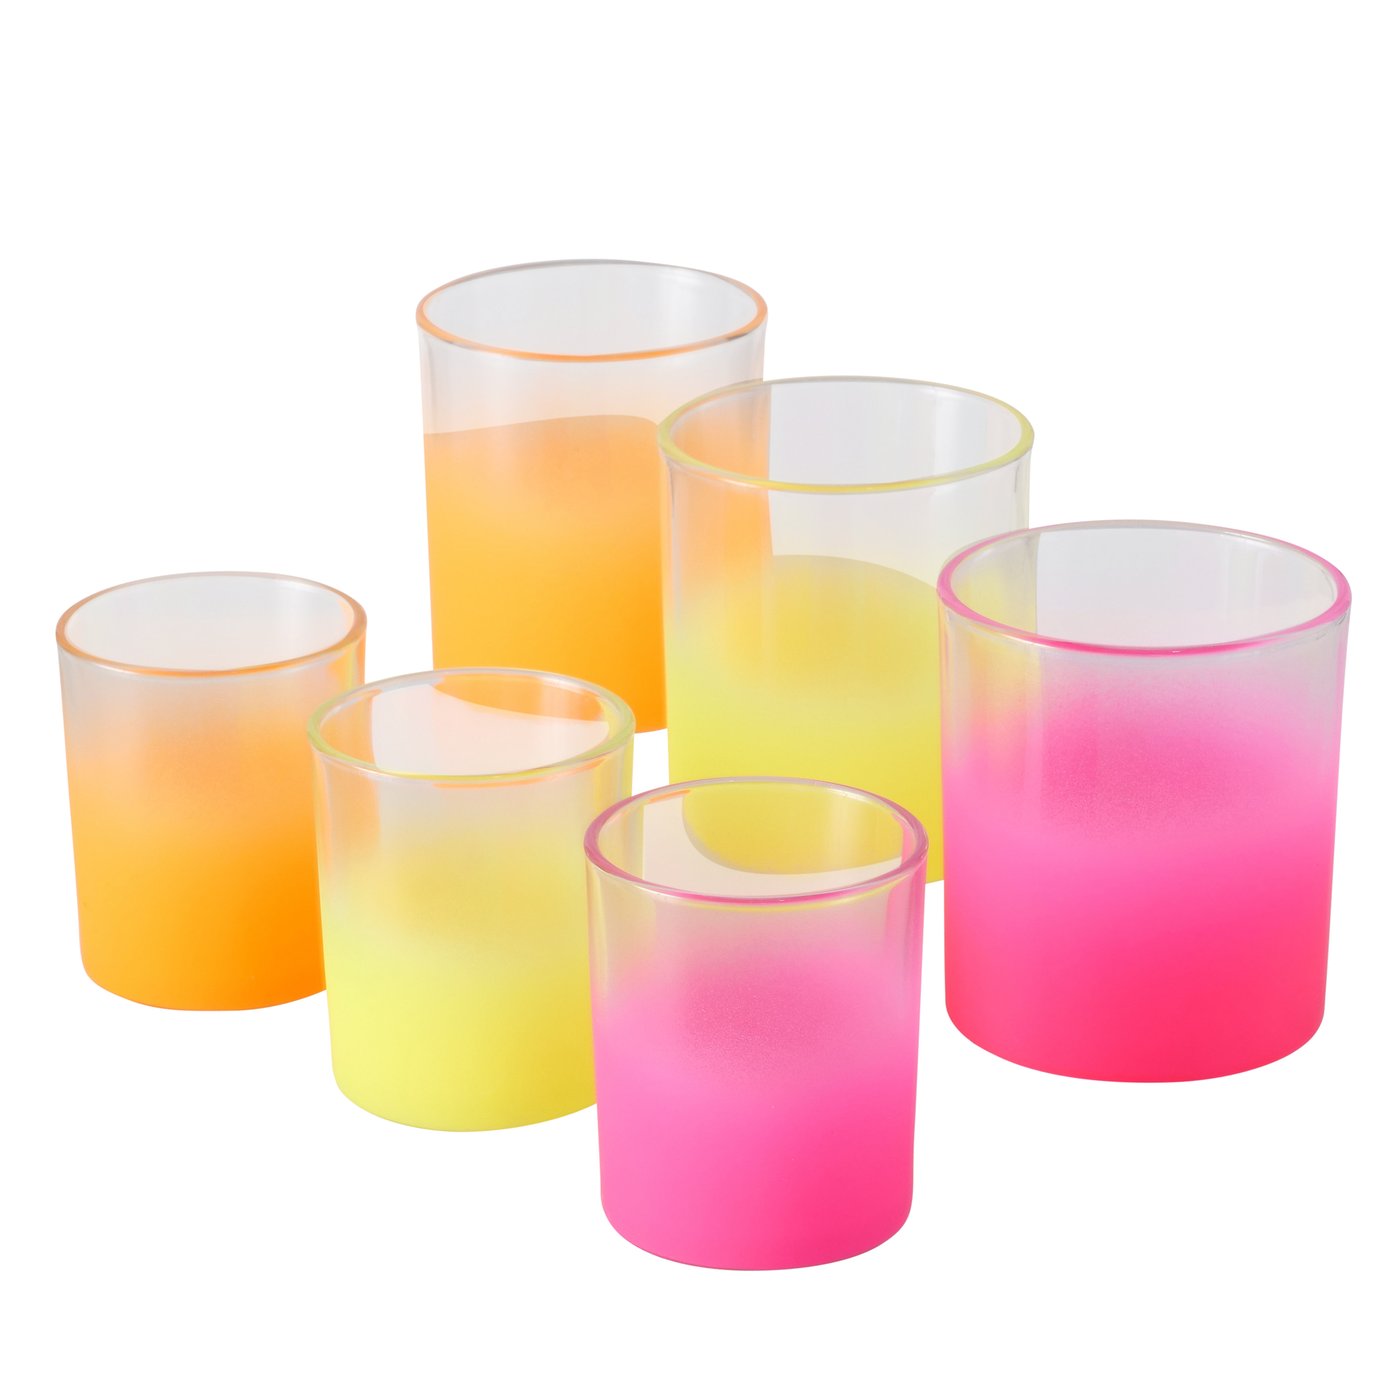 &Quirky Neon Colour Pop Tealight Holders : Set of 2 - Orange, Pink or Yellow